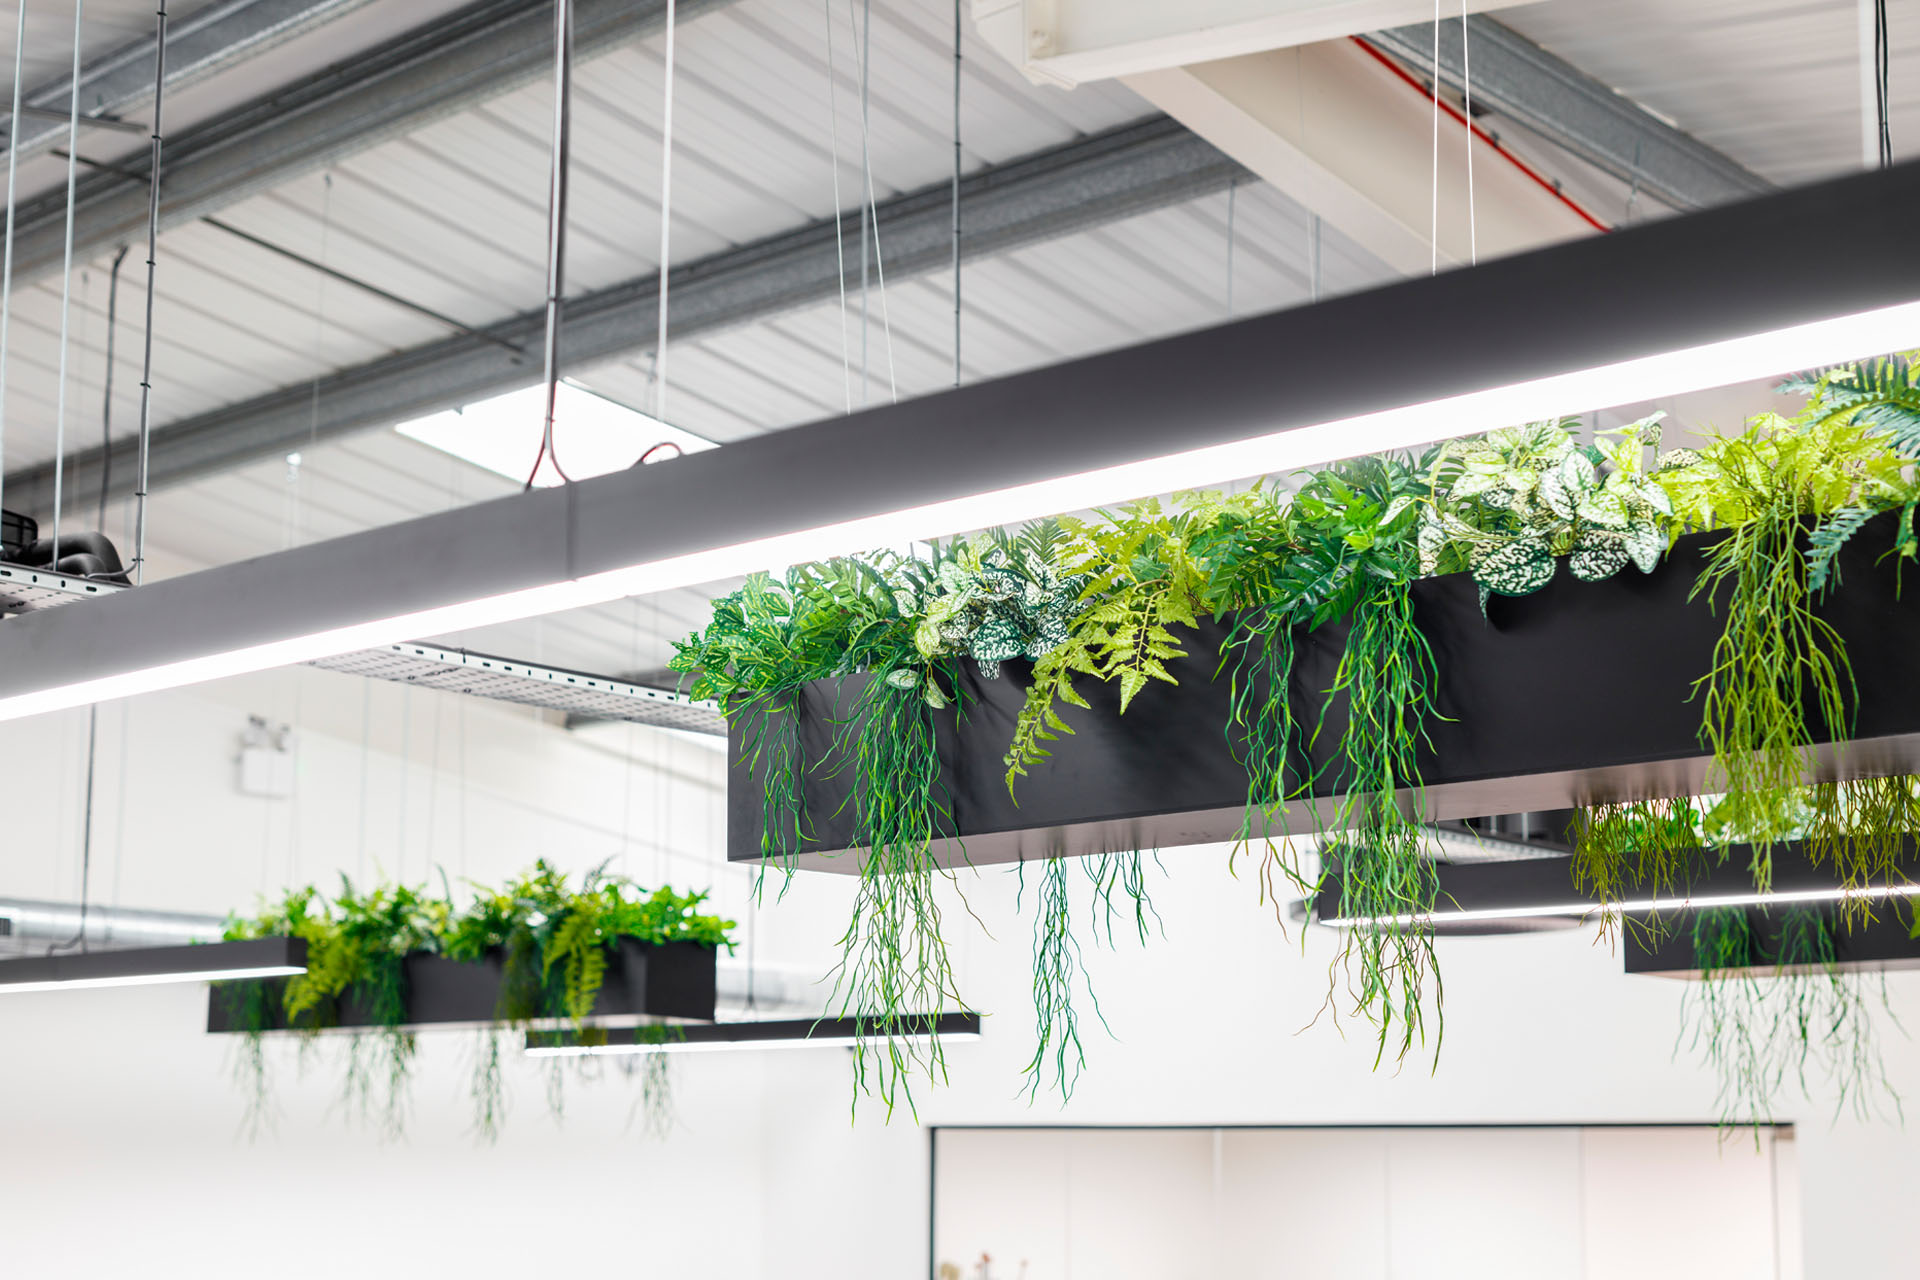 Office interior showing plants in hanging baskets.